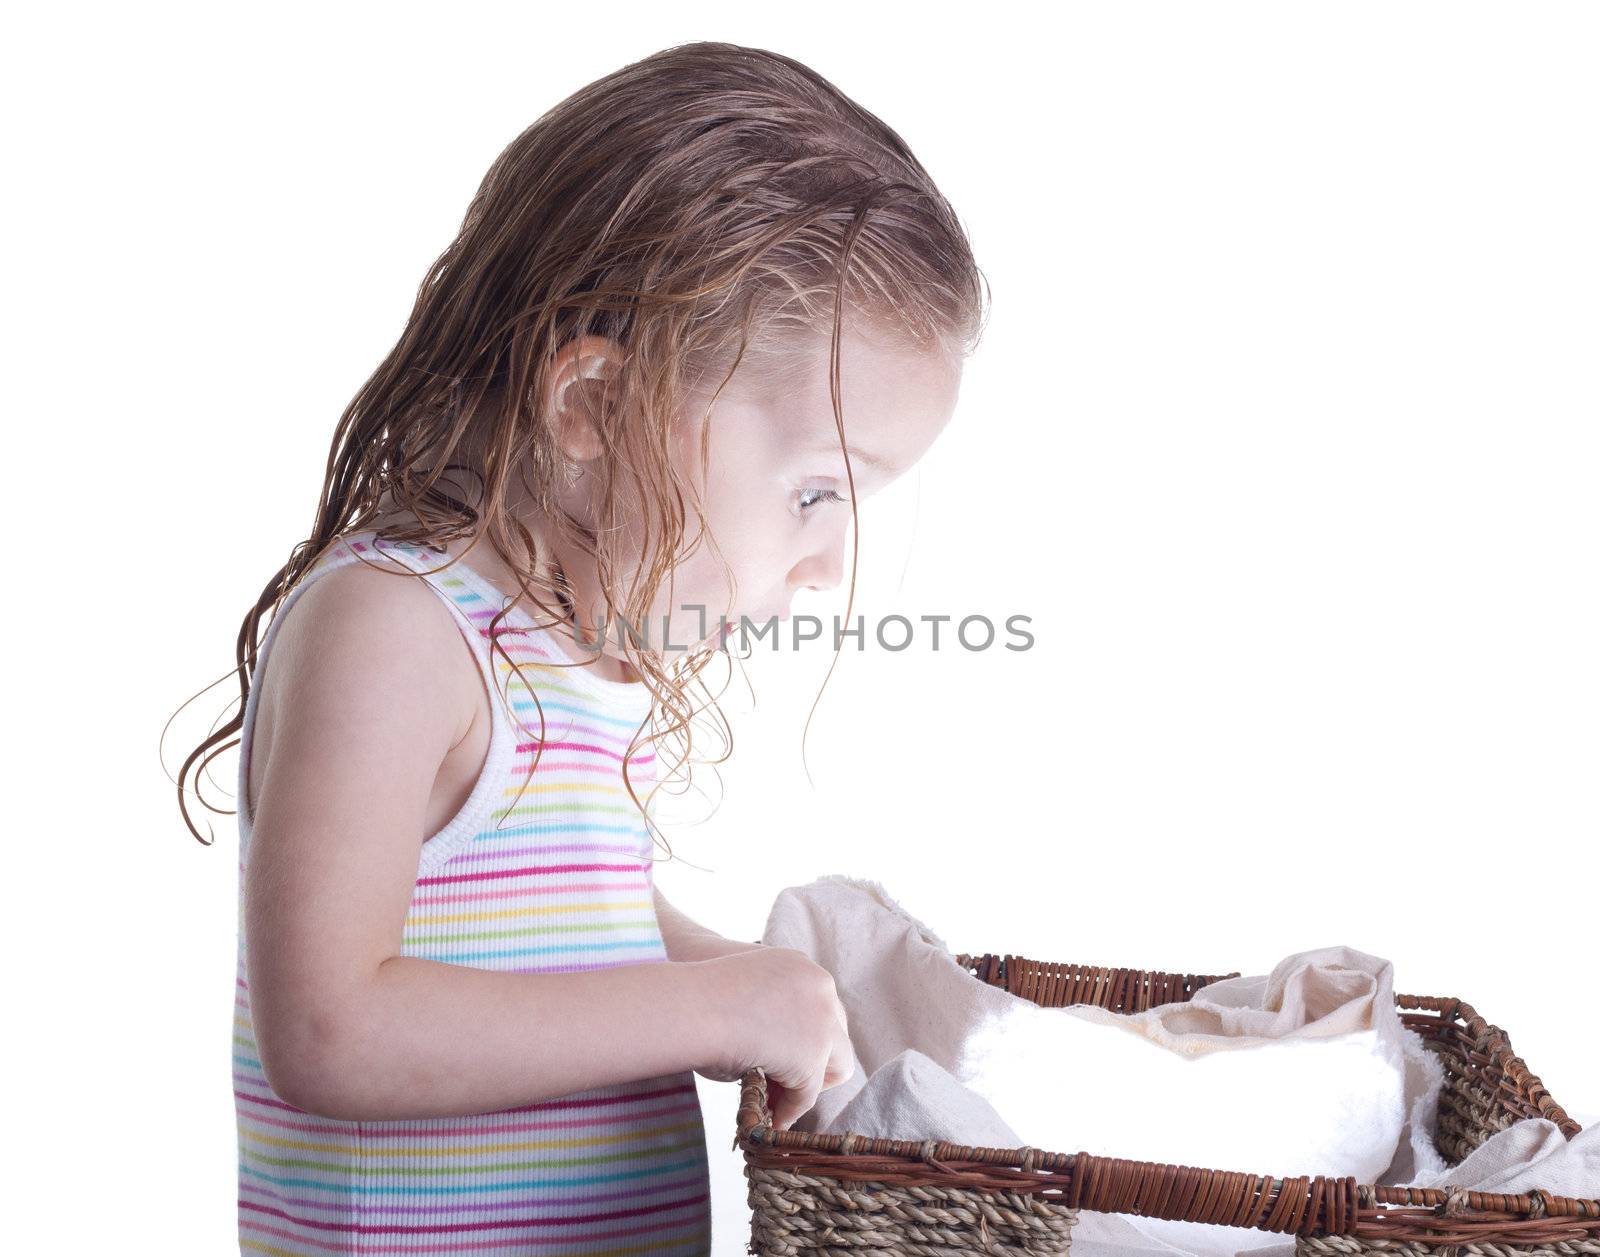 An excite young girl looking into a basket.  The basket is glowing with a ball of light or something inside of it.